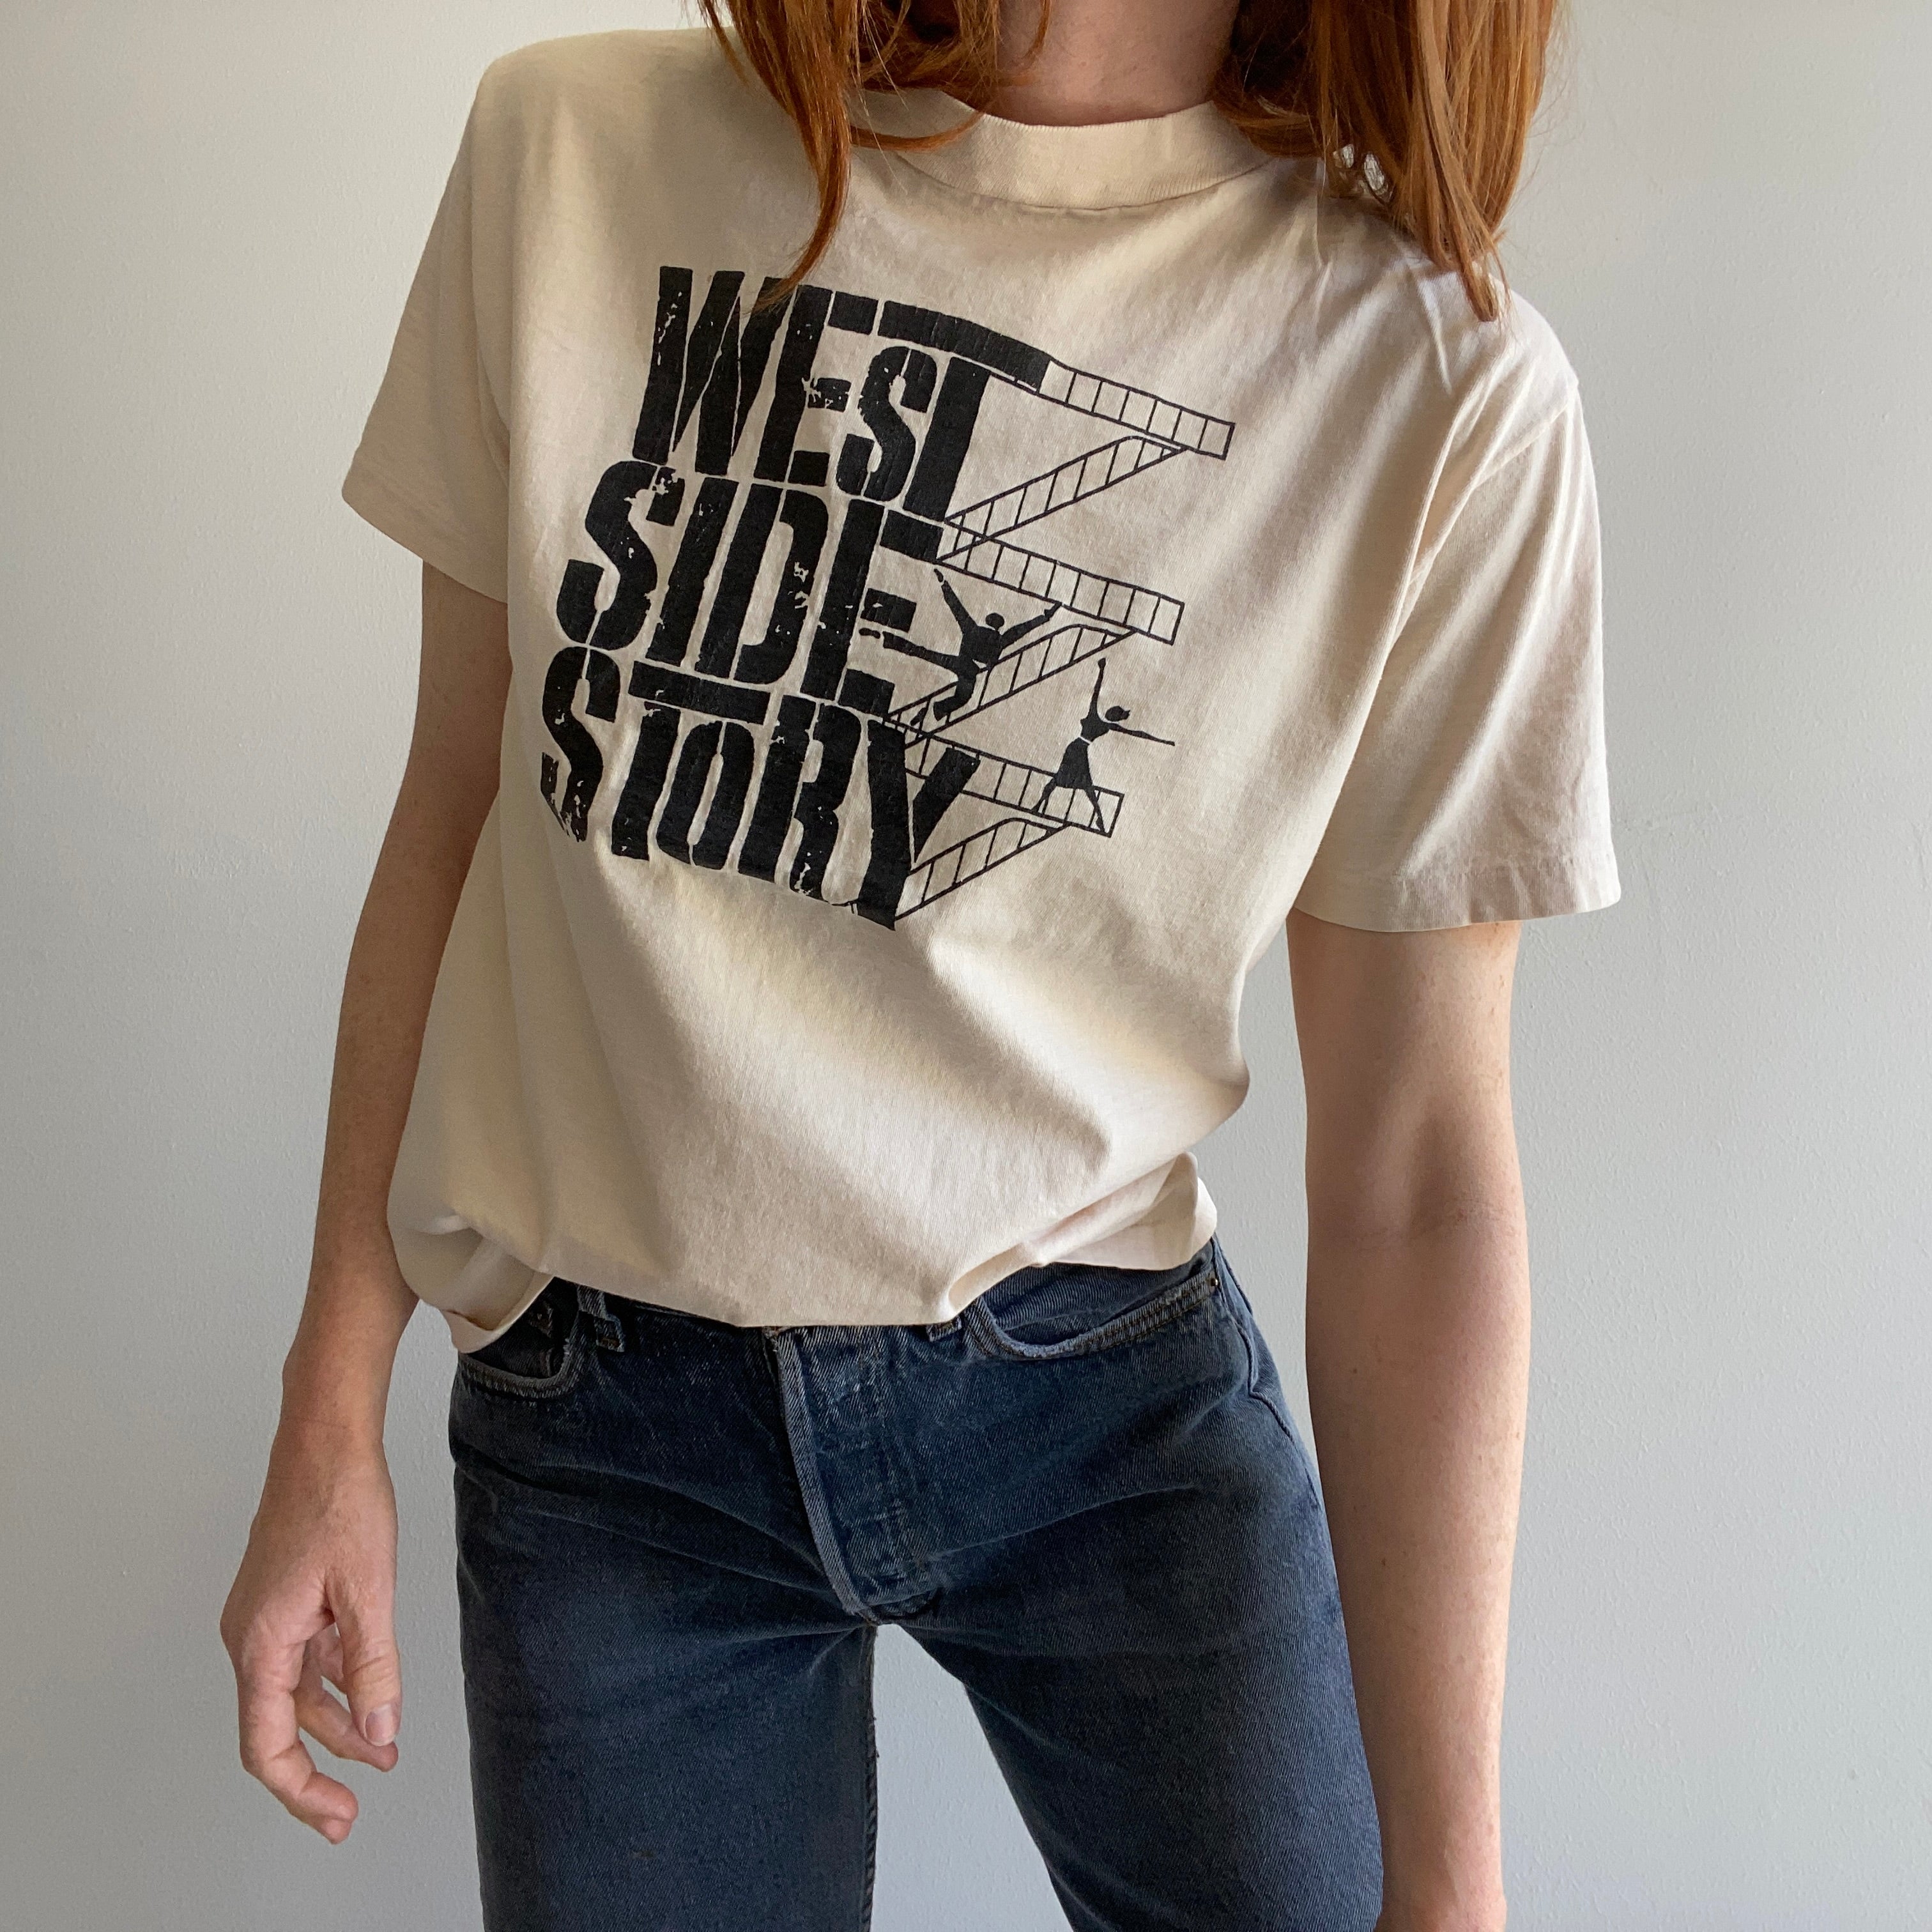 1980 West Side Story Hanes Beefy Tee Epic Soft Cotton T-Shirt